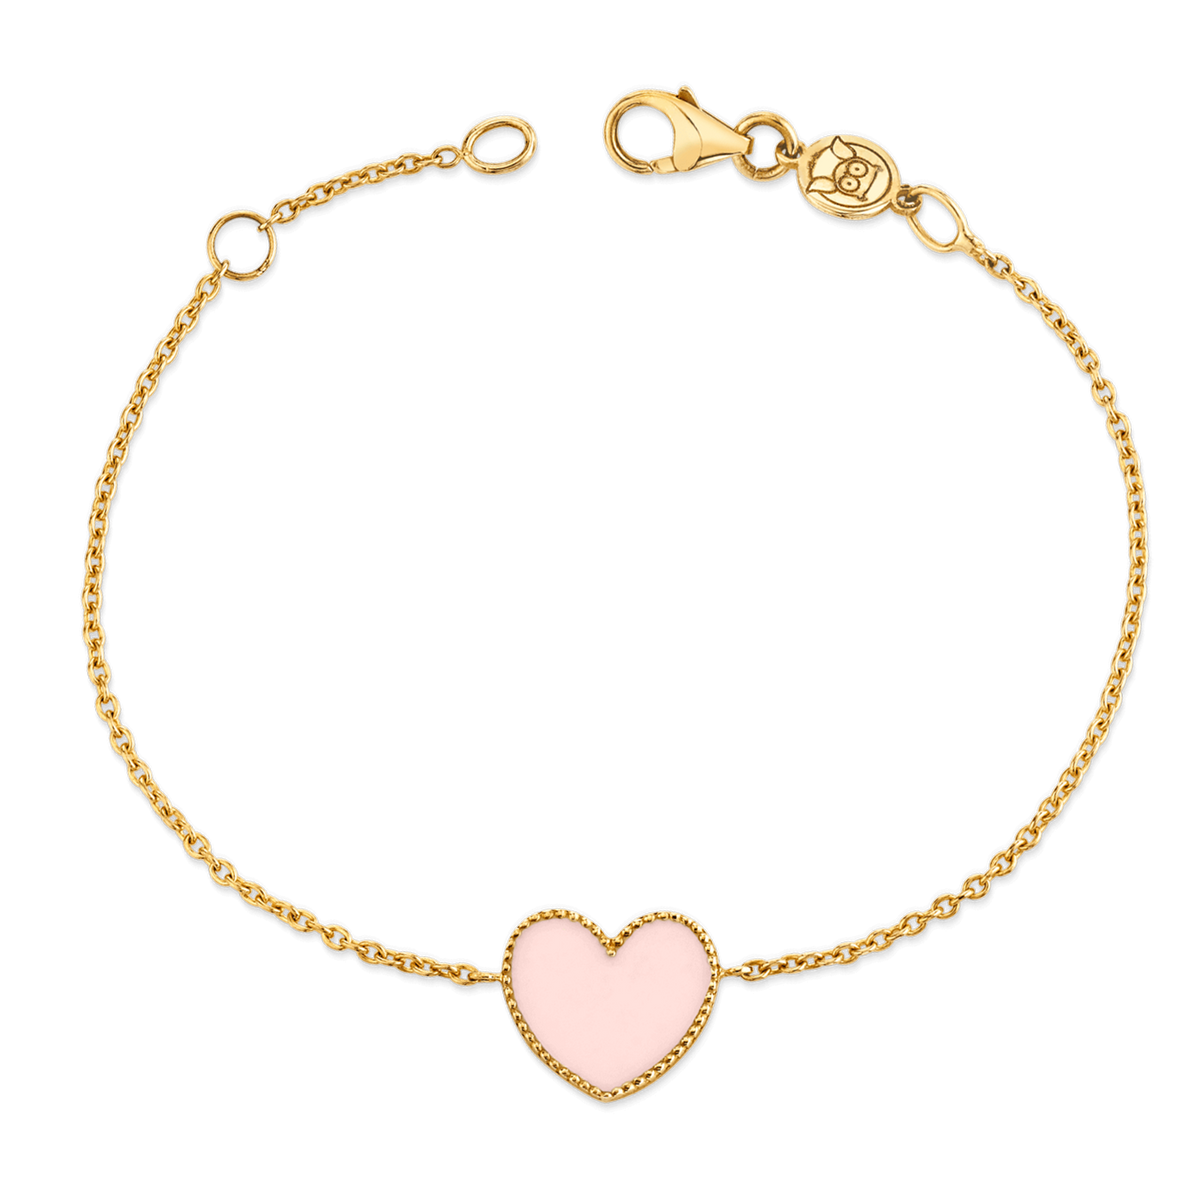 Sterling Silver Ball Slider Bracelet - With Engraved Rose Gold Heart Charm  - The Perfect Keepsake Gift